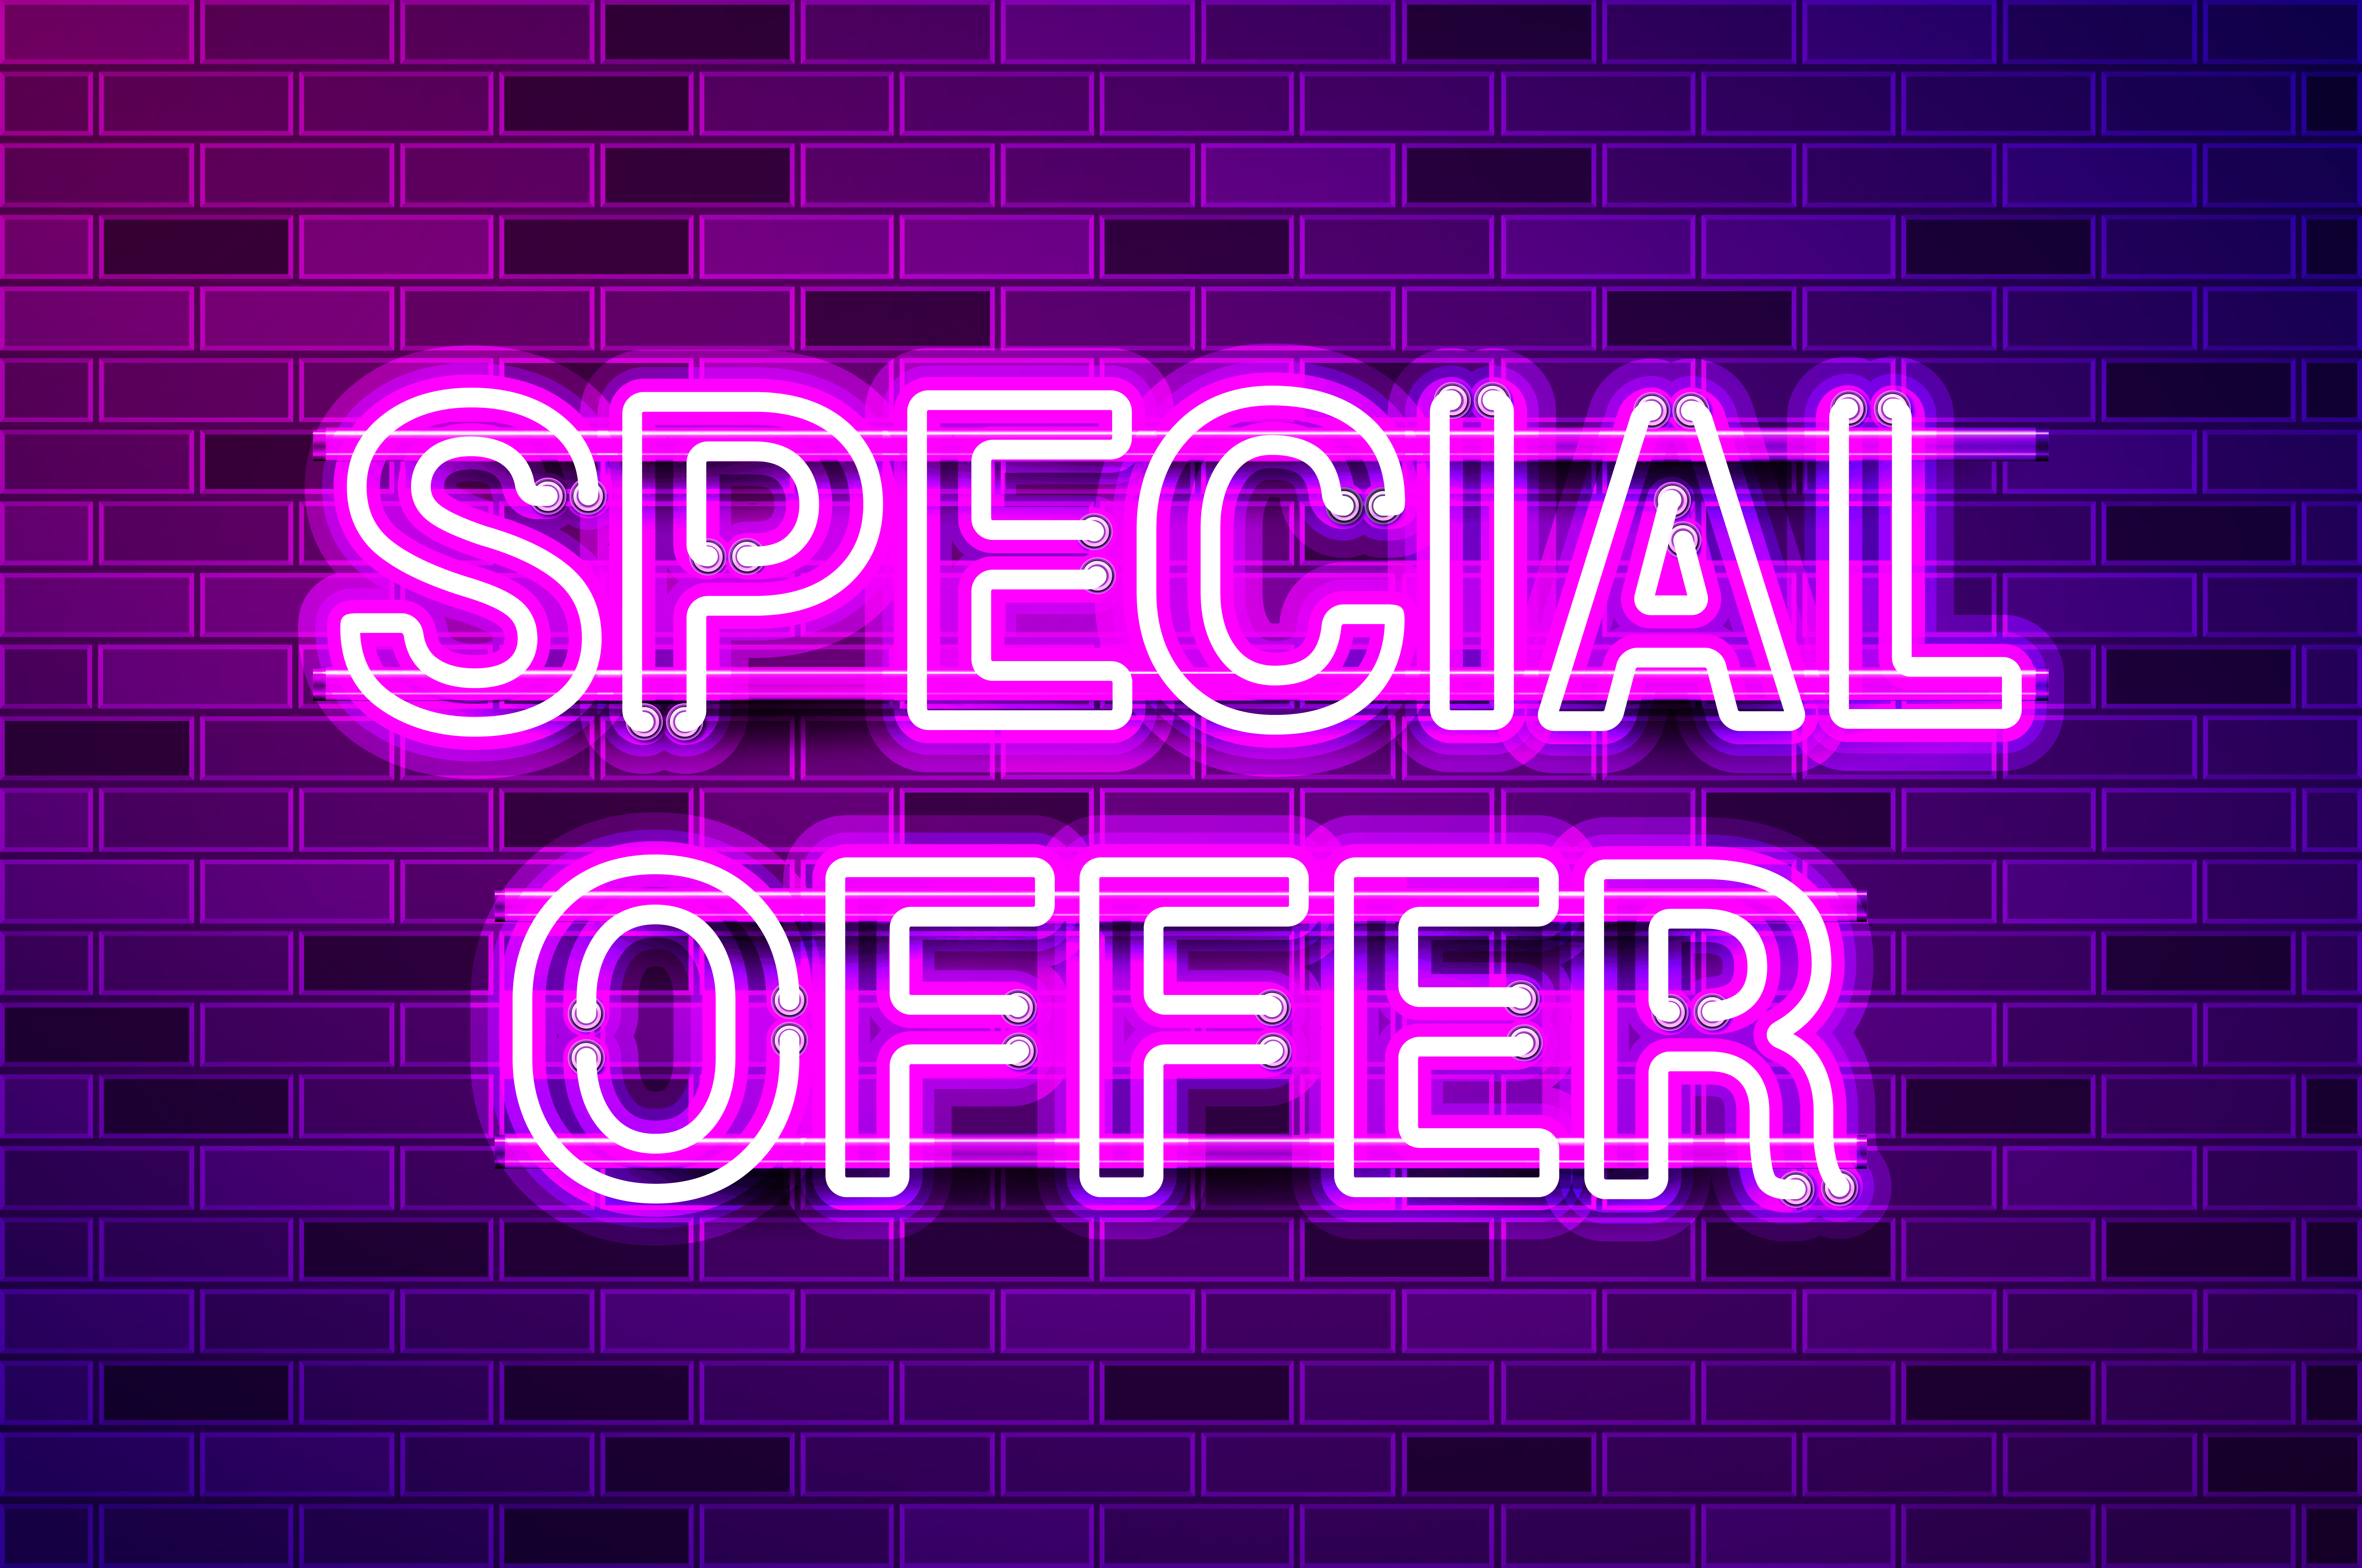 SPECIAL OFFER glowing neon lamp sign. Realistic vector illustration. Purple brick wall, violet glow, metal holders.. SPECIAL OFFER glowing purple neon lamp sign